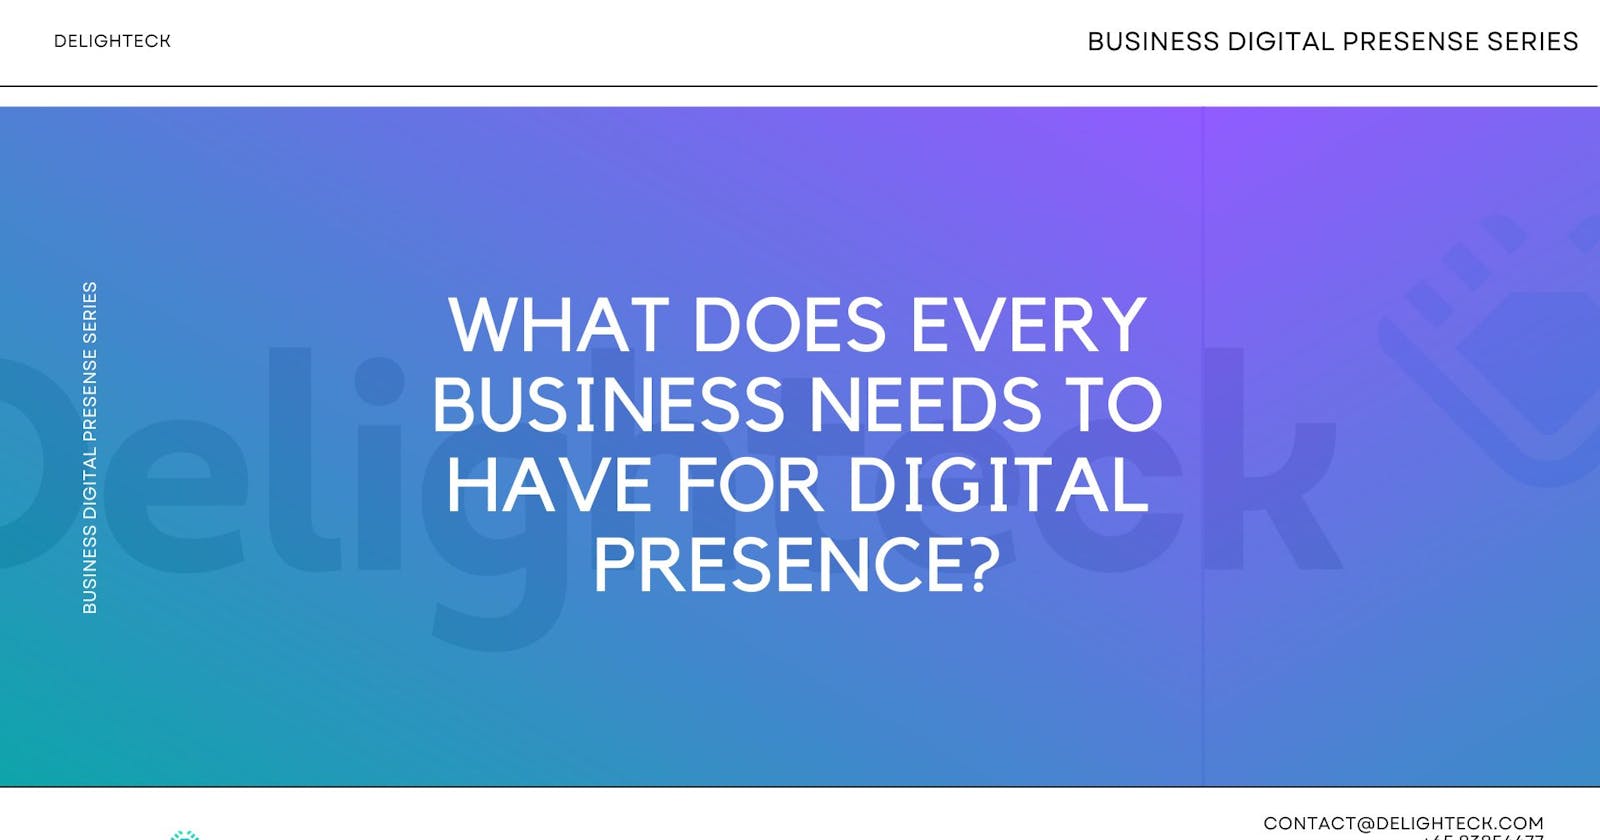 What does every business needs to have digital presence?